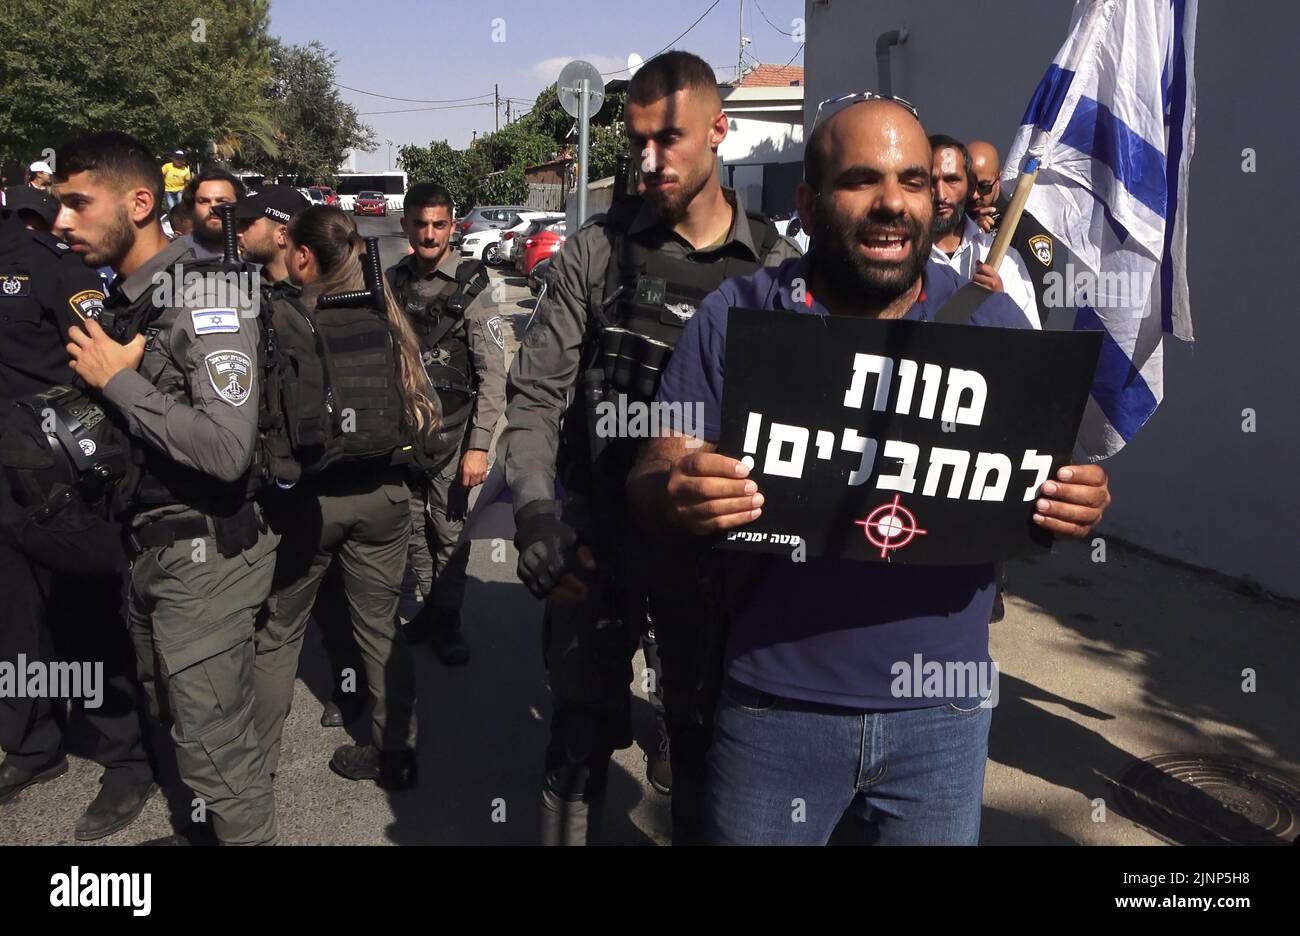 A right-wing counter-protester holds a sign which reads 'Death to the terrorists' as he confronts Israeli left-wing activists and Palestinians taking part in a demonstration against Israeli occupation and settlement activity in the Sheikh Jarrah neighborhood on August 12, 2022 in Jerusalem, Israel. The Palestinian neighborhood of Sheikh Jarrah is currently the center of a number of property disputes between Palestinians and right-wing Jewish Israelis. Some houses were occupied by Israeli settlers following a court ruling Stock Photo